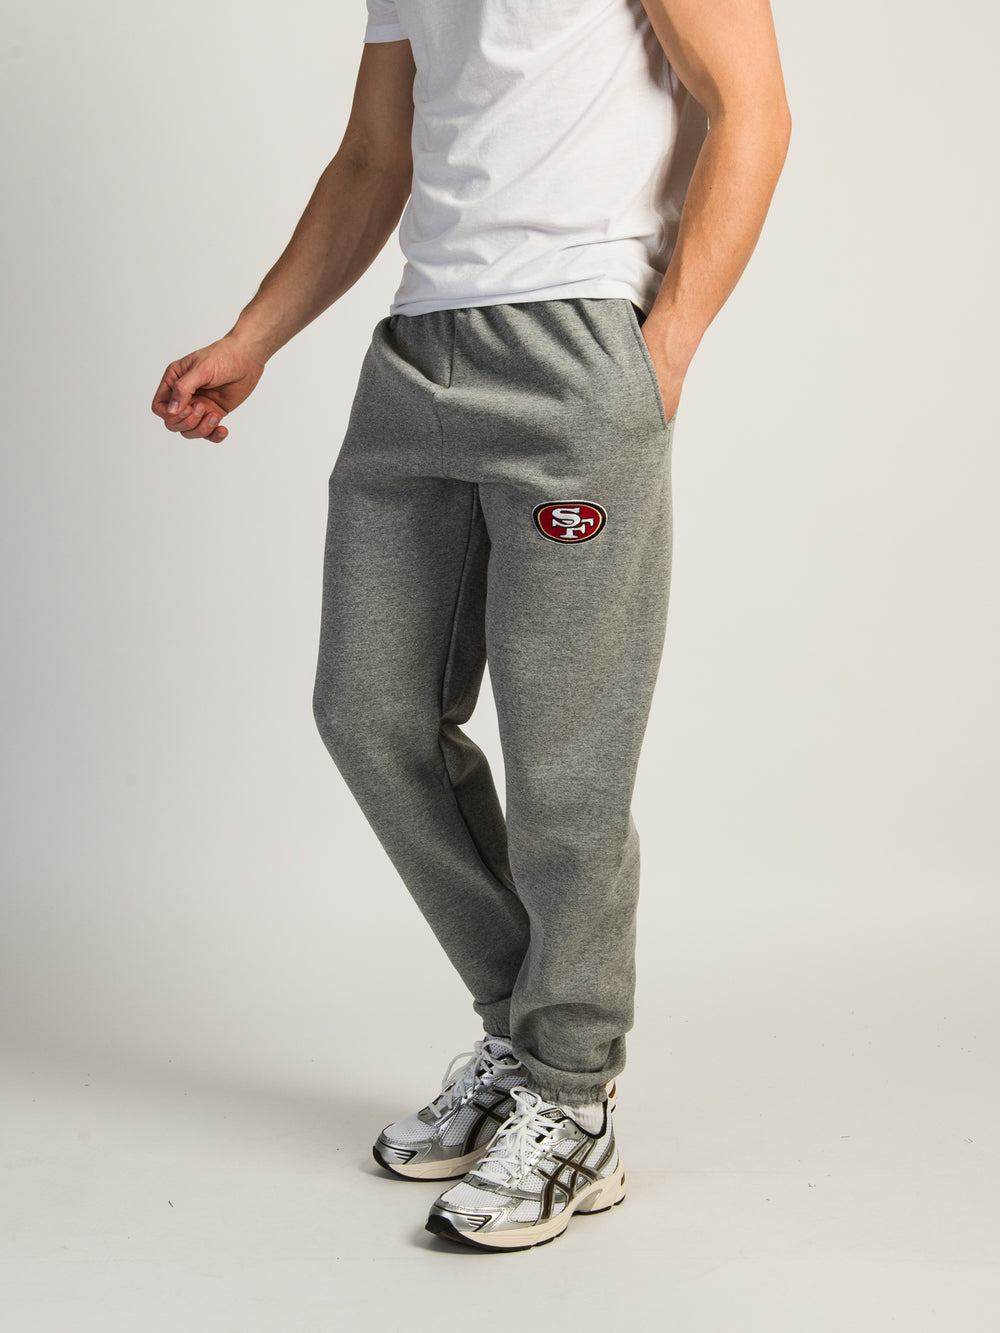 RUSSELL SAN FRANCISCO 49ERS EMBROIDERED SWEATPANTS